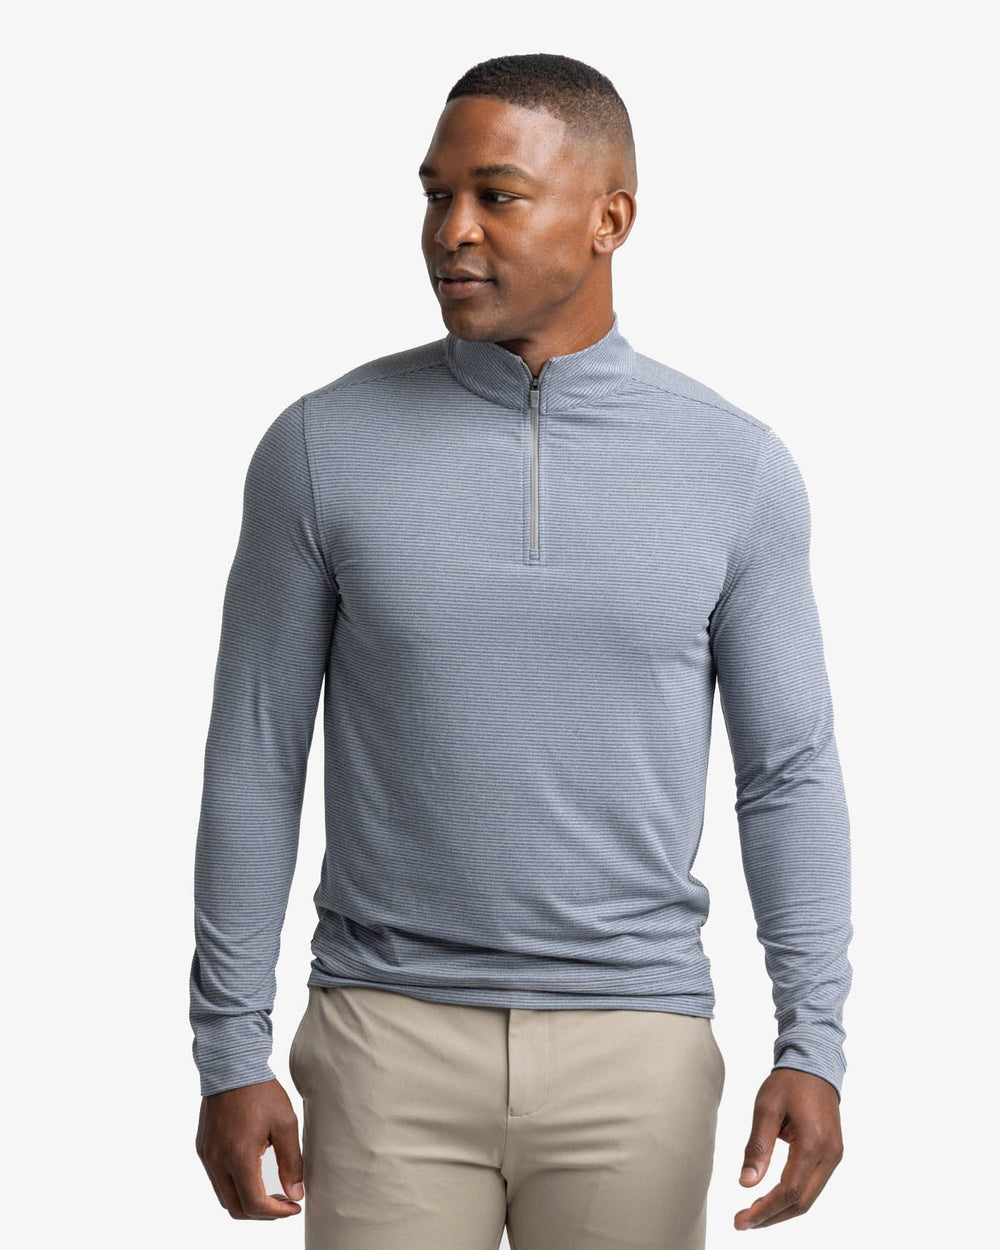 The front view of the Southern Tide Cruiser Heather Micro-Stripe Performance Quarter Zip Pullover by Southern Tide - Heather Shadow Grey